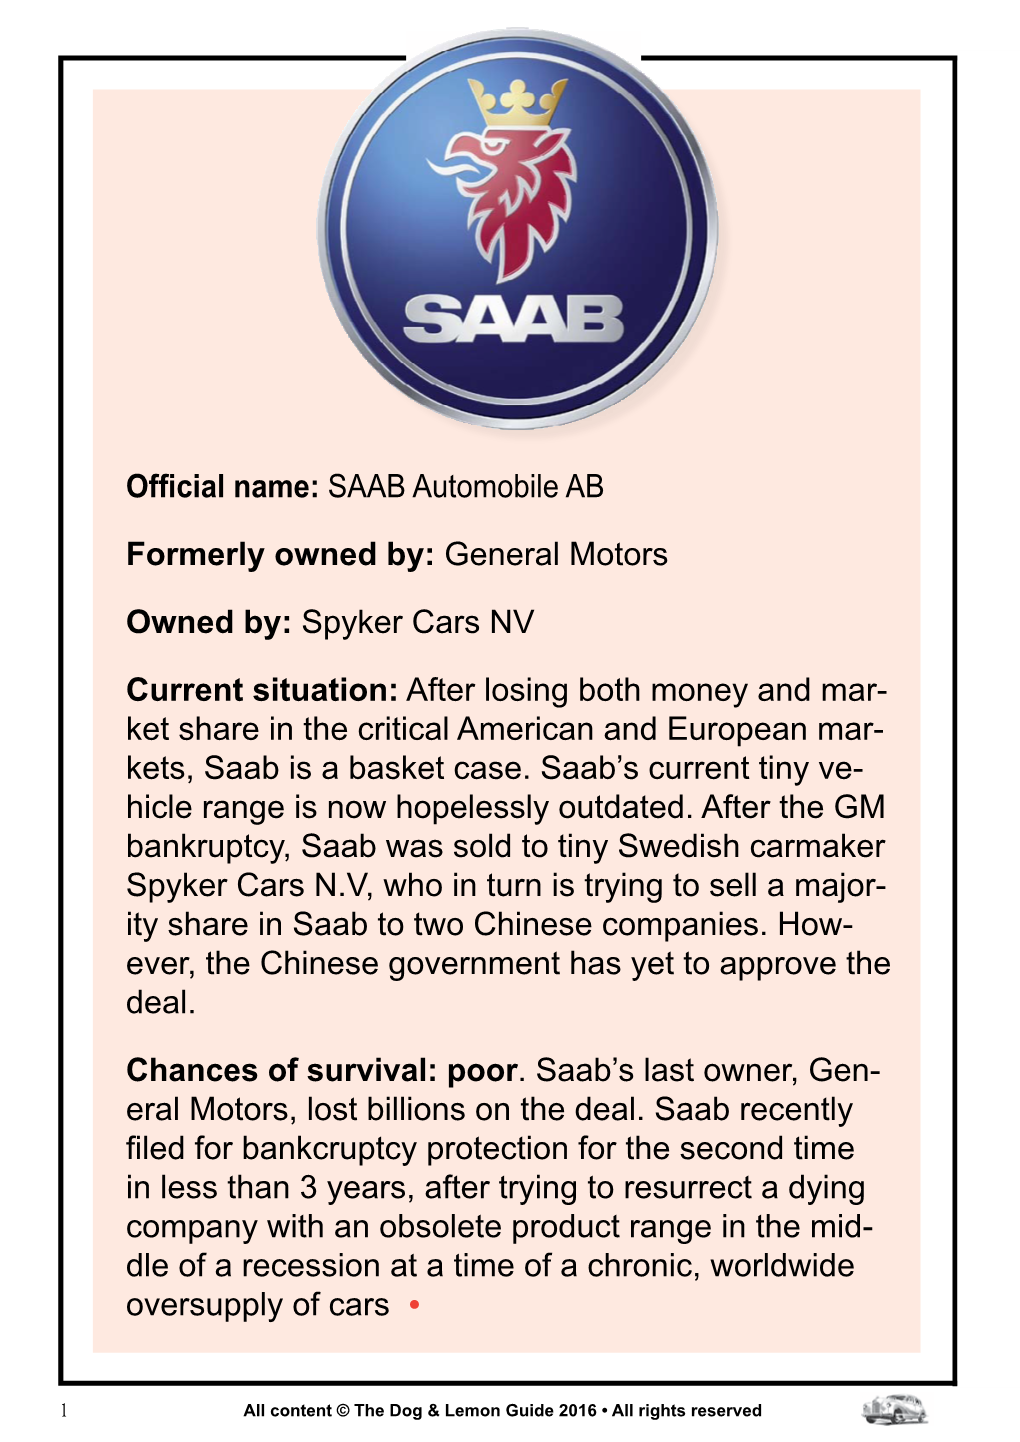 Official Name: SAAB Automobile AB Formerly Owned By: General Motors Owned By: Spyker Cars NV Current Situation: After Losing